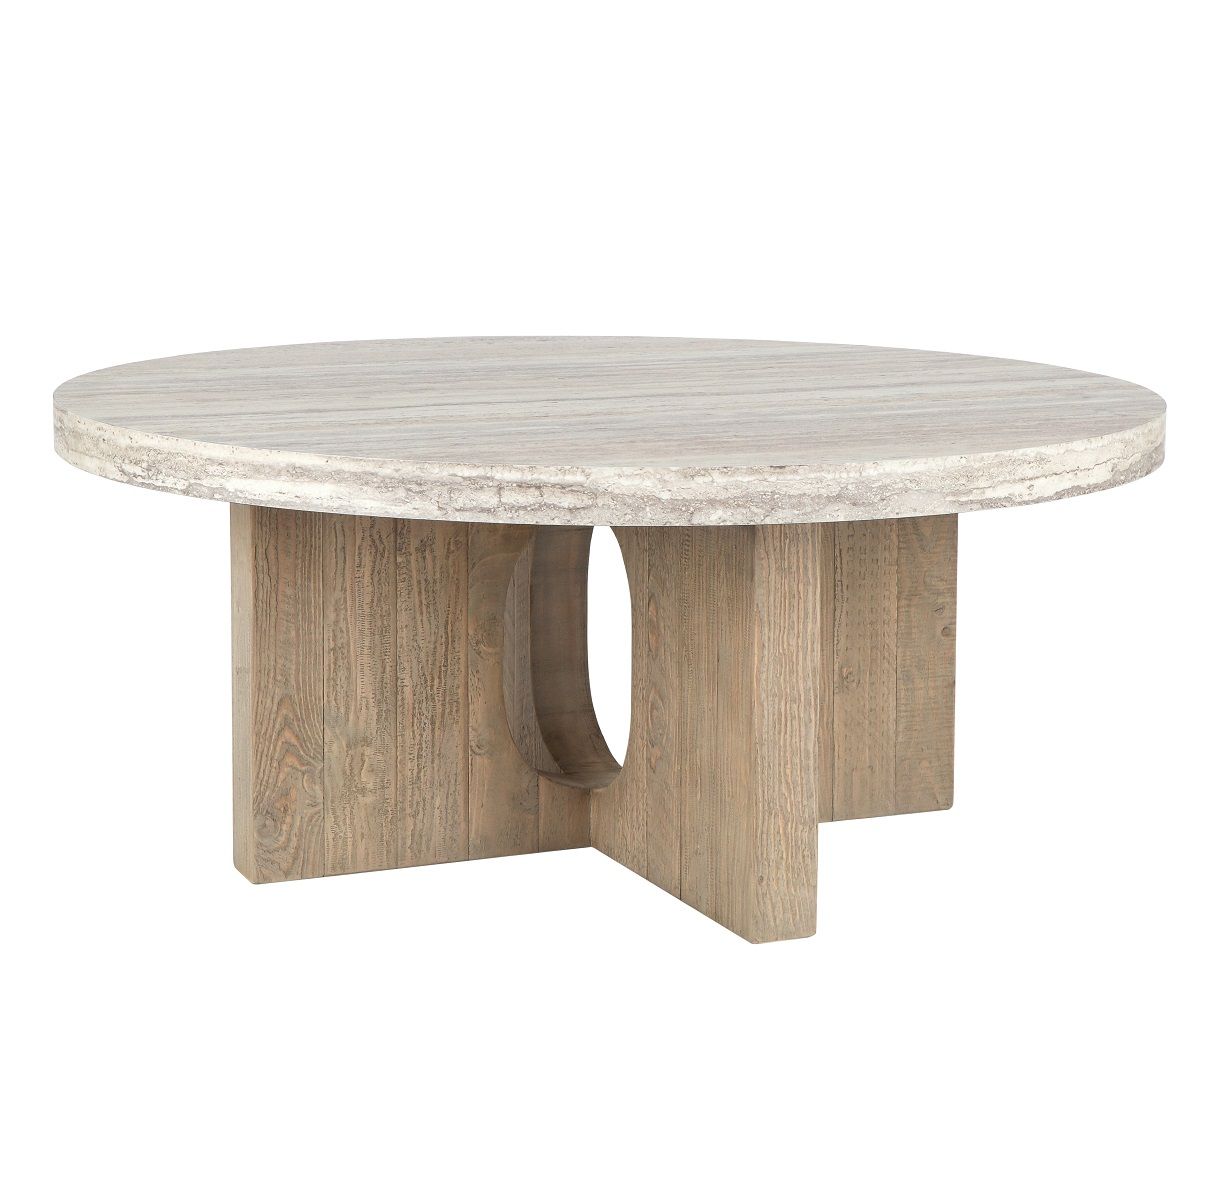 Talbot - Round Coffee Table - Light Brown & Gray